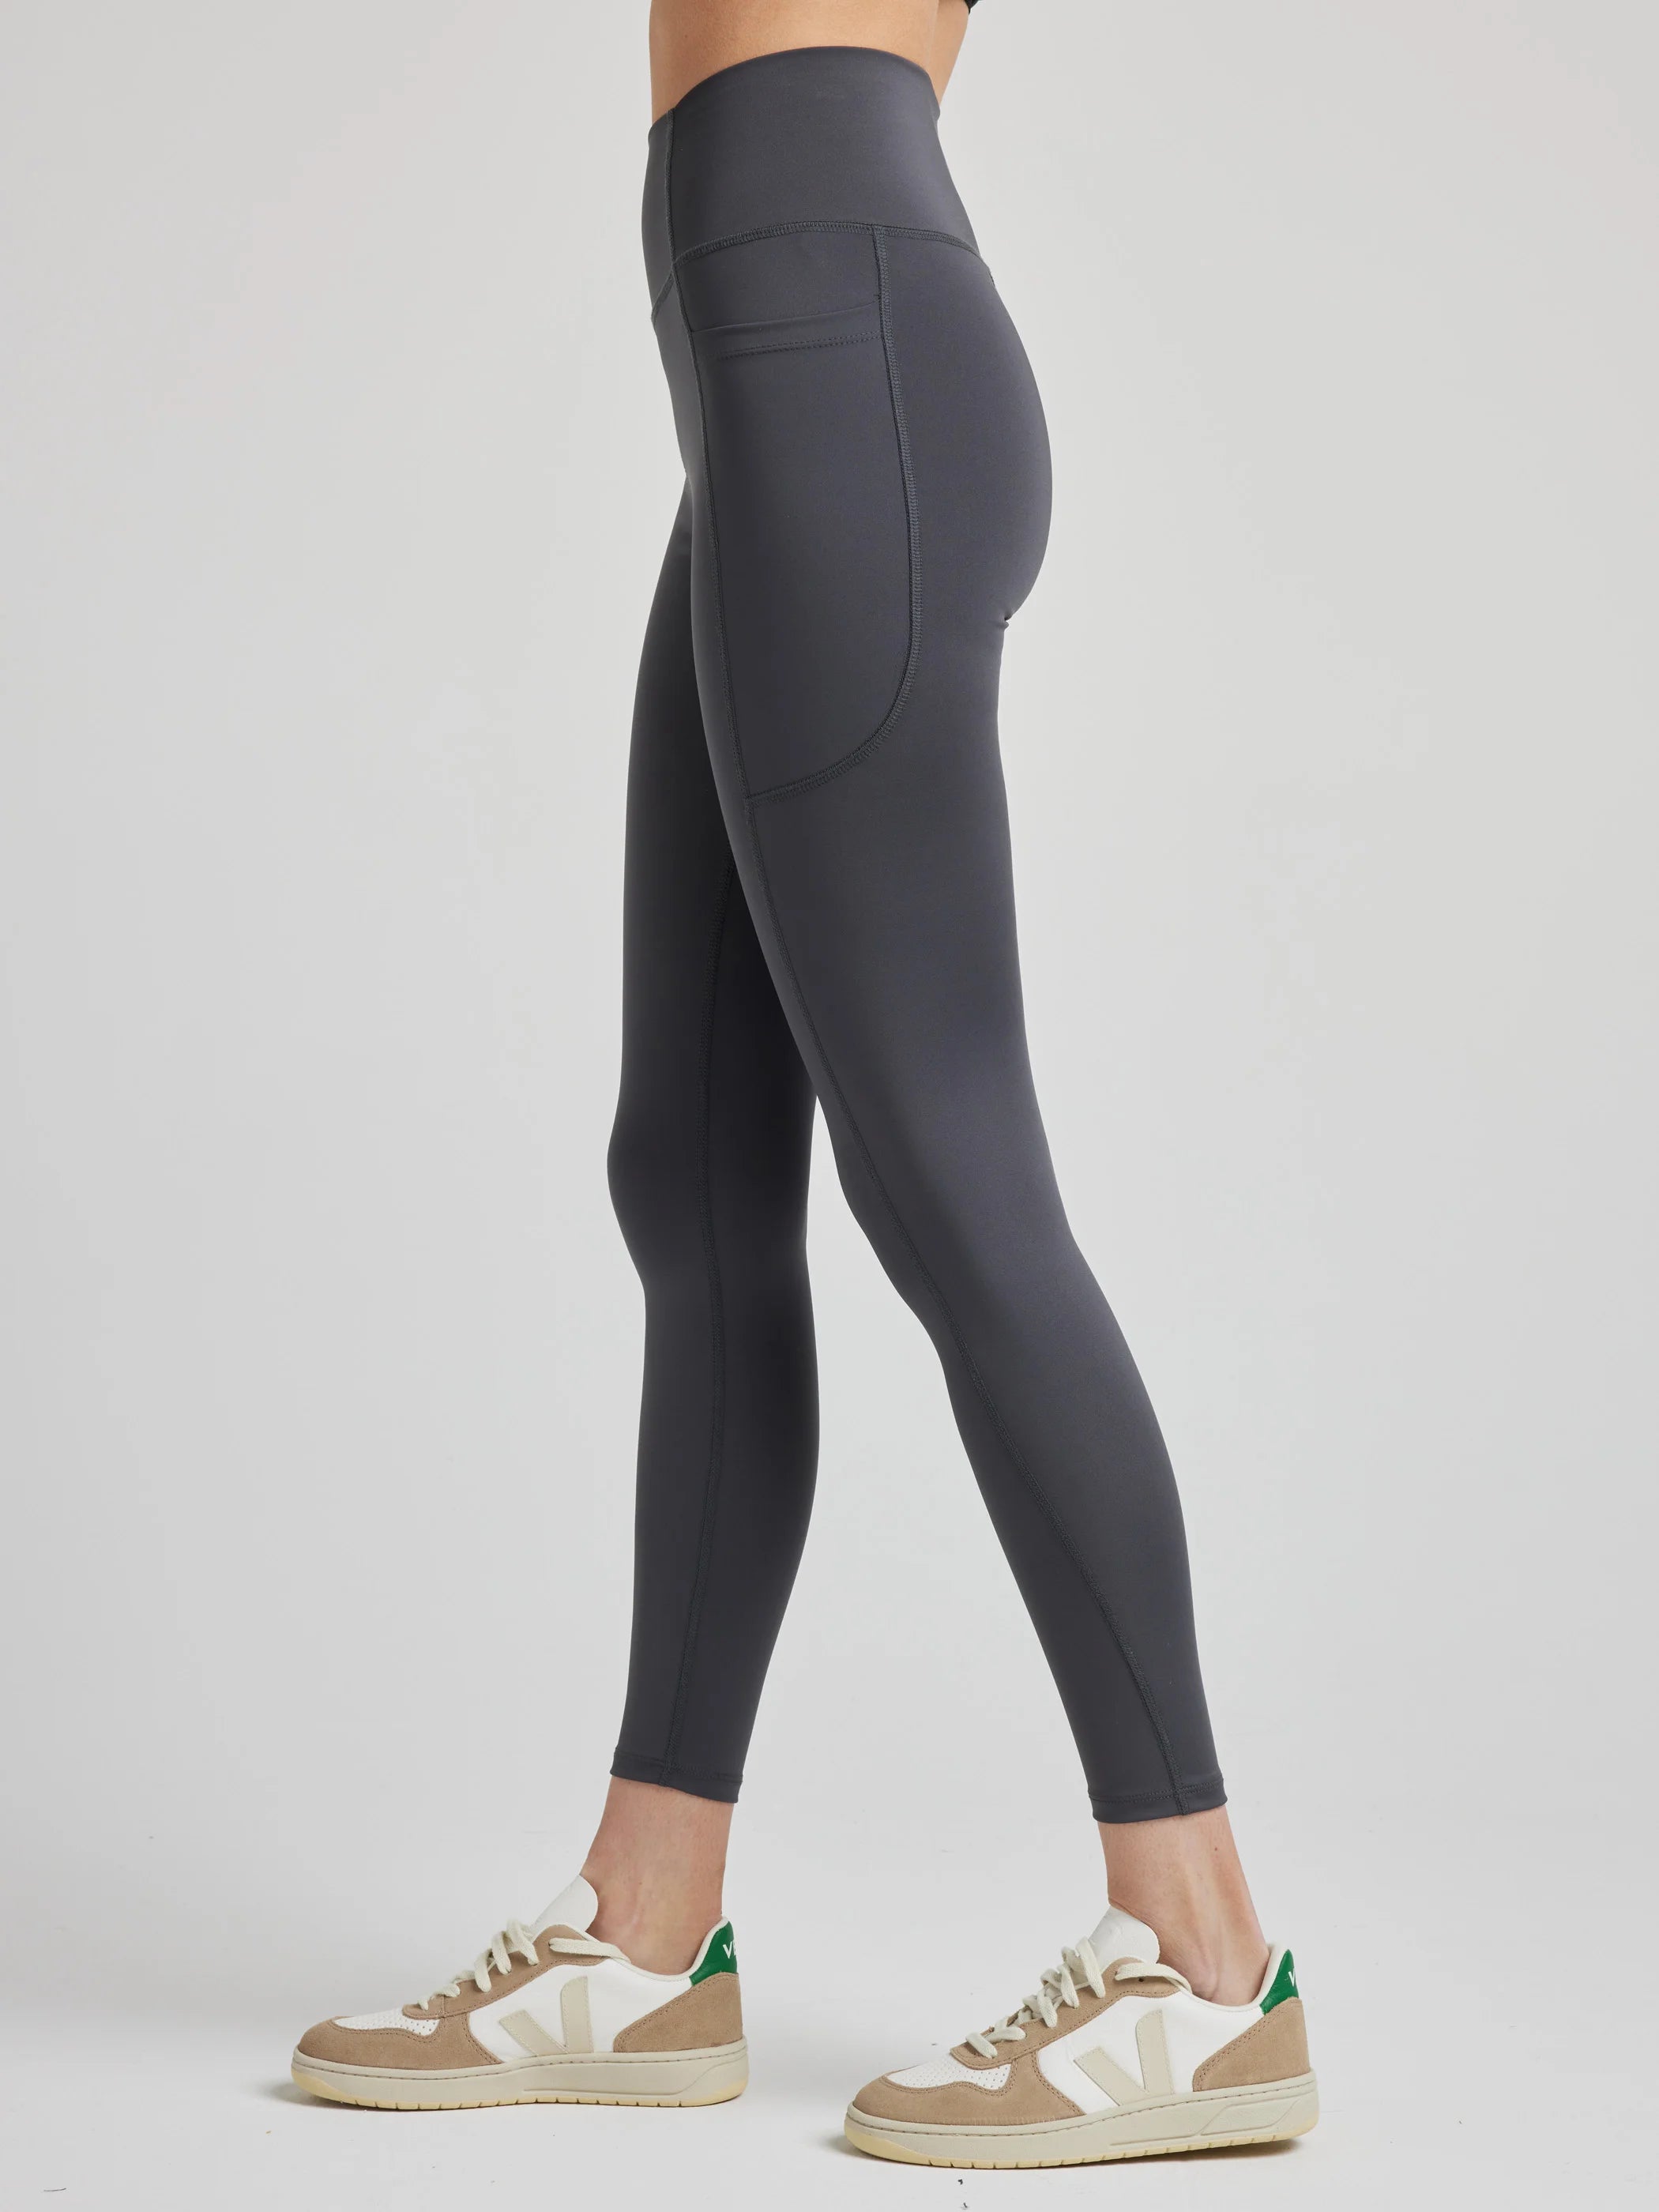 Essential Leggings with Pockets - Graphite